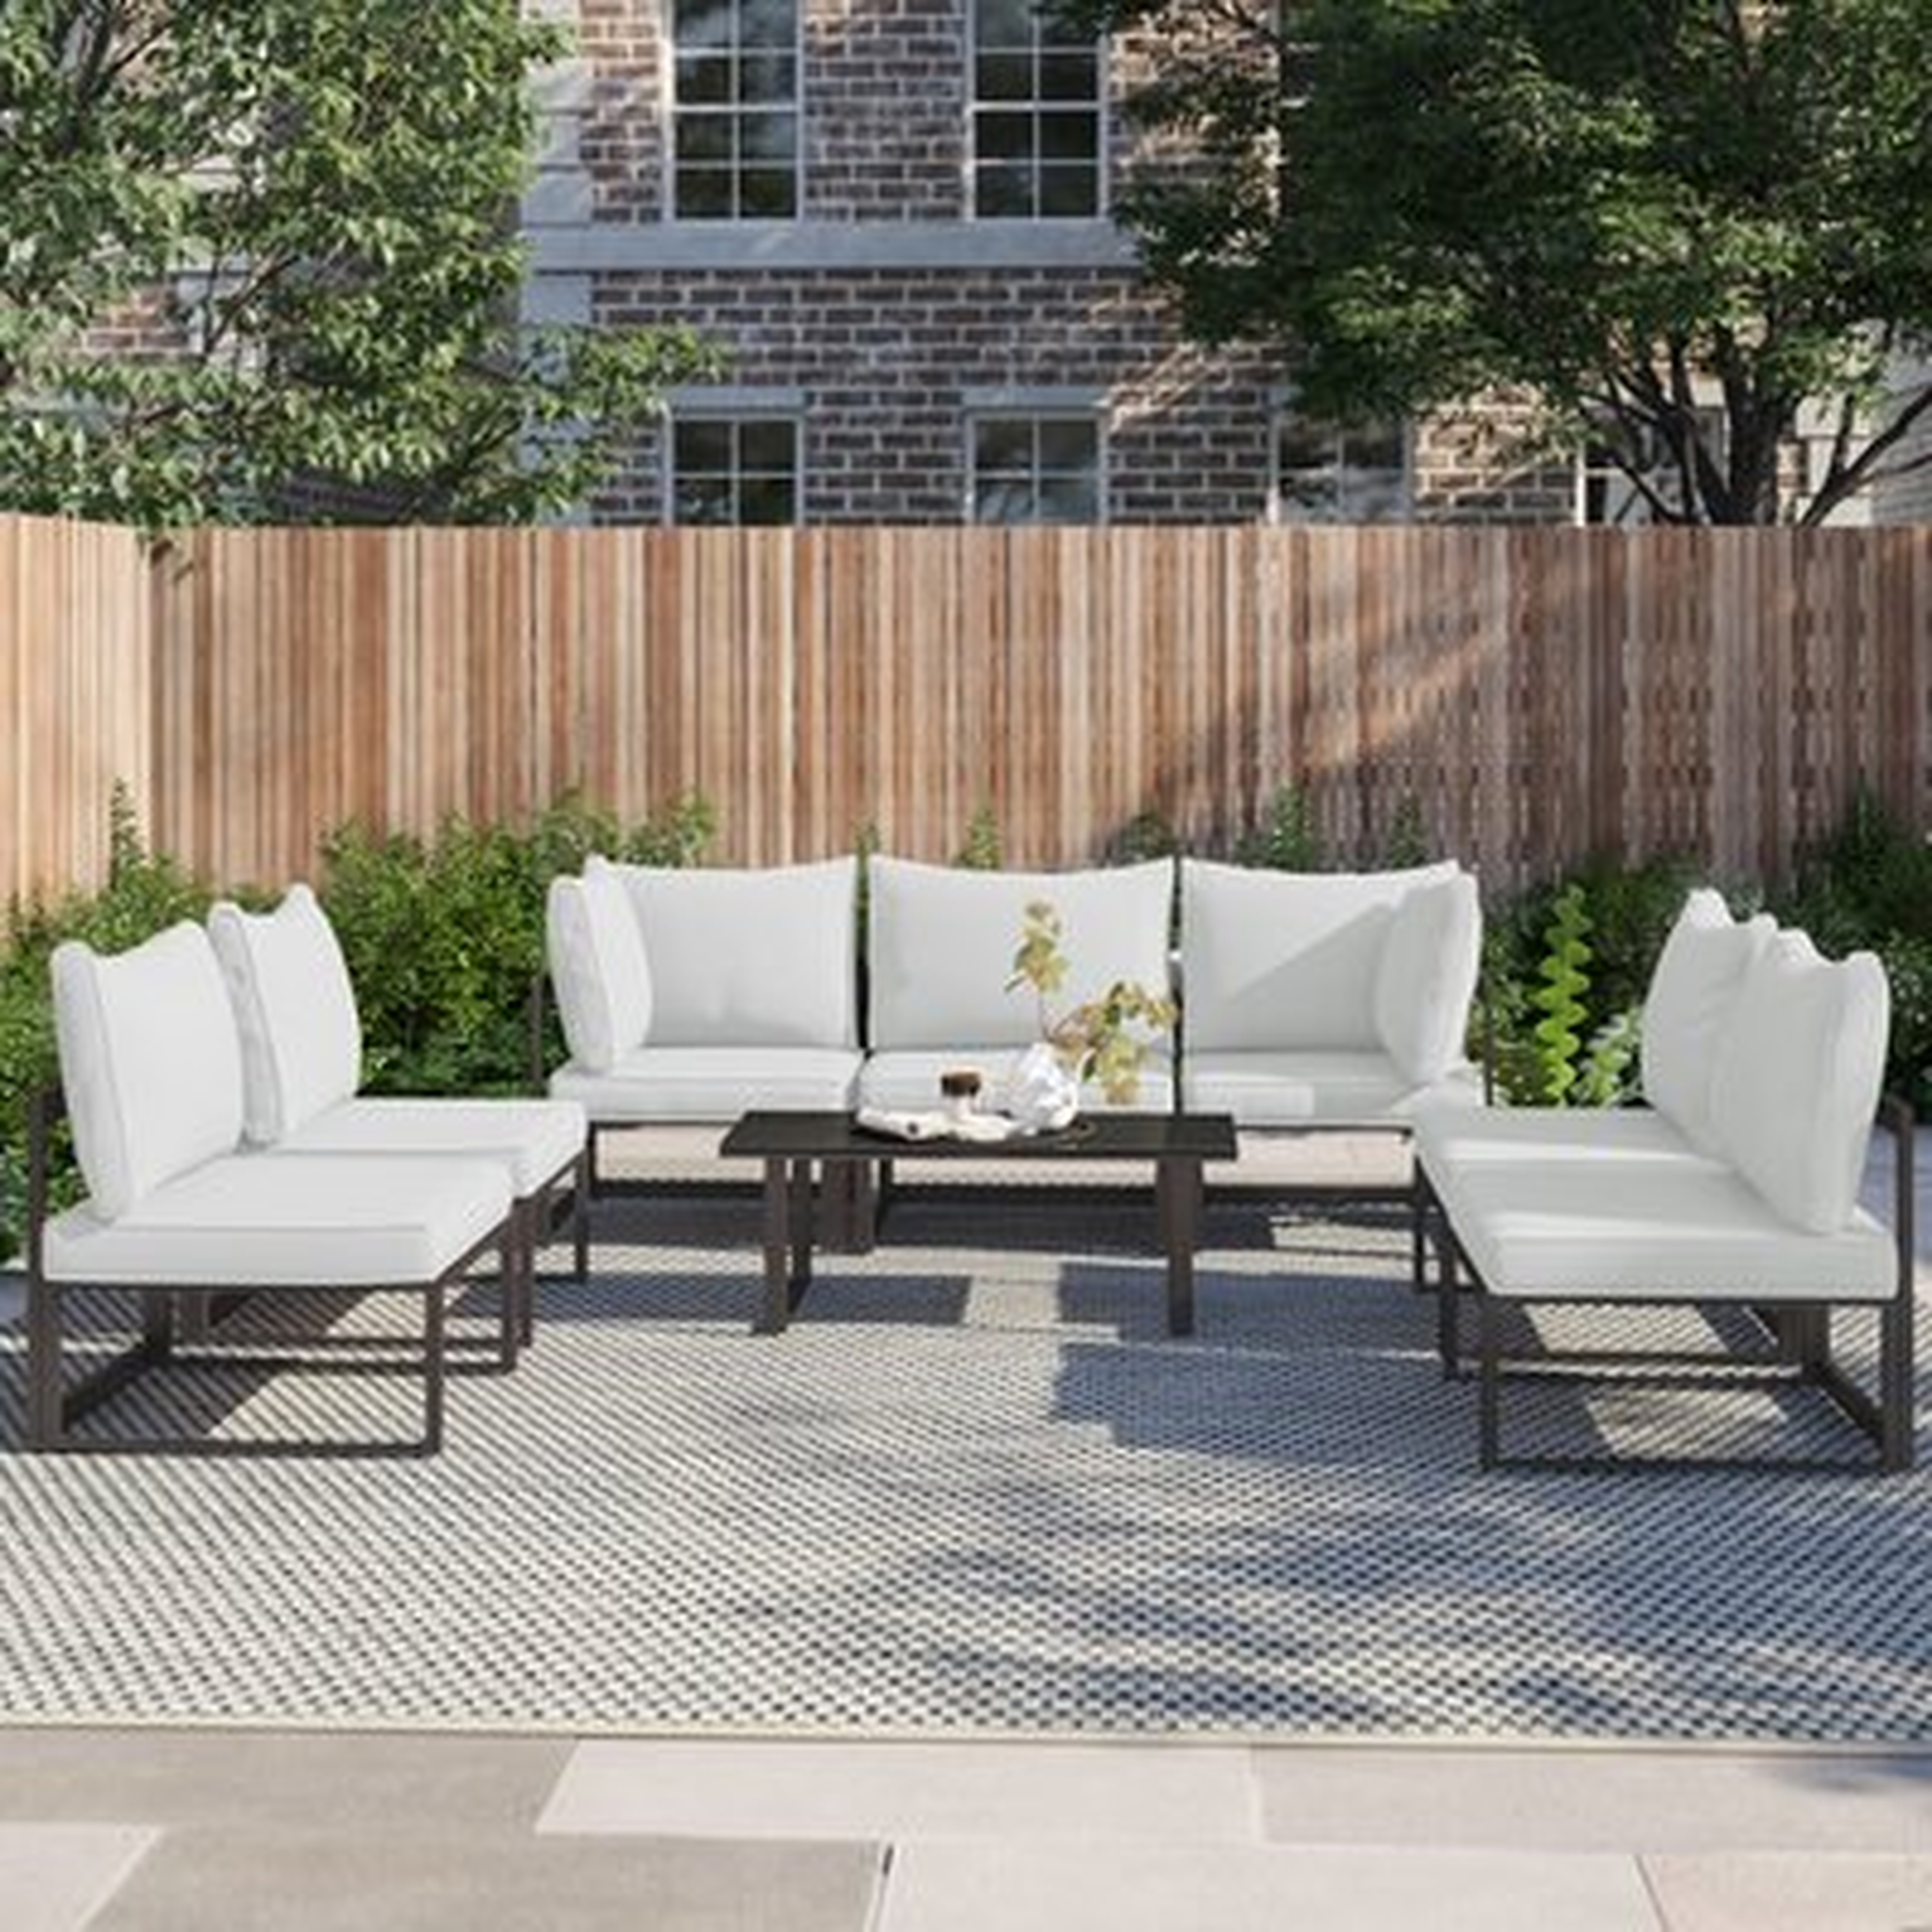 Annemarie Outdoor Patio 8 Piece Sectional Seating Group with Cushions - Wayfair